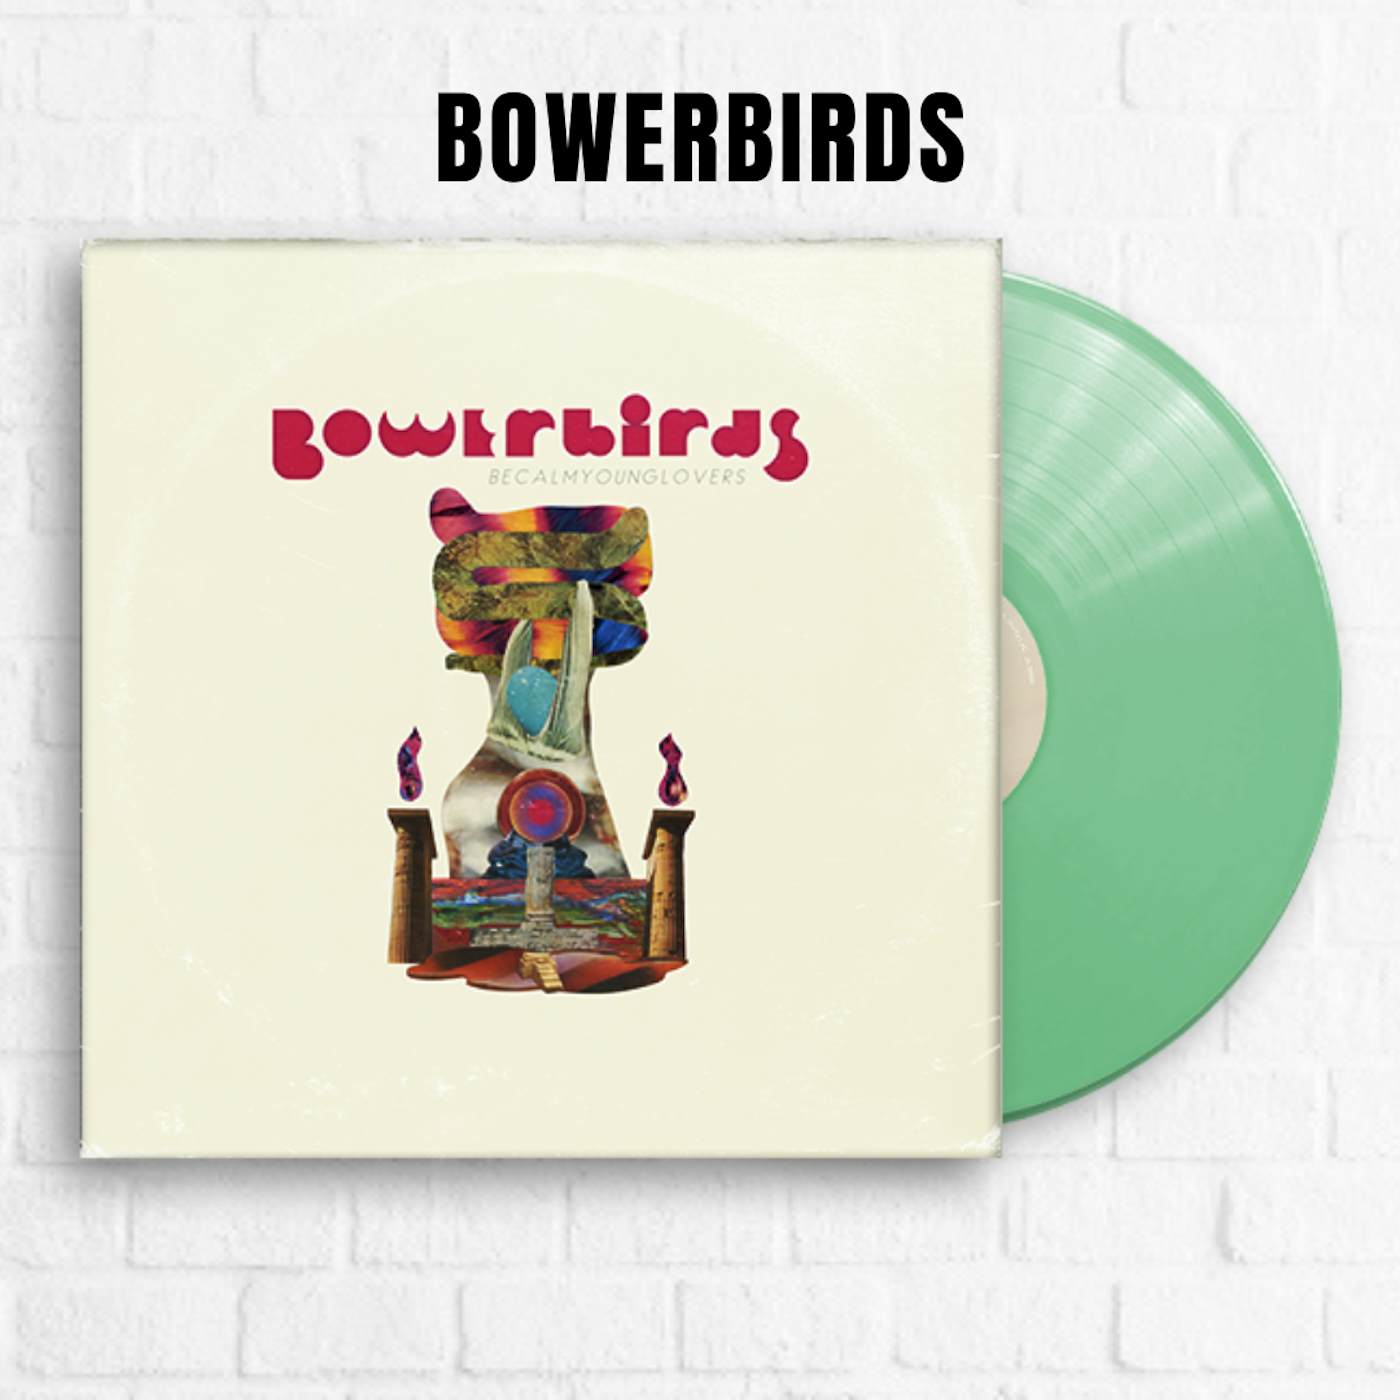 Bowerbirds becalmyounglovers [Limited Teal]